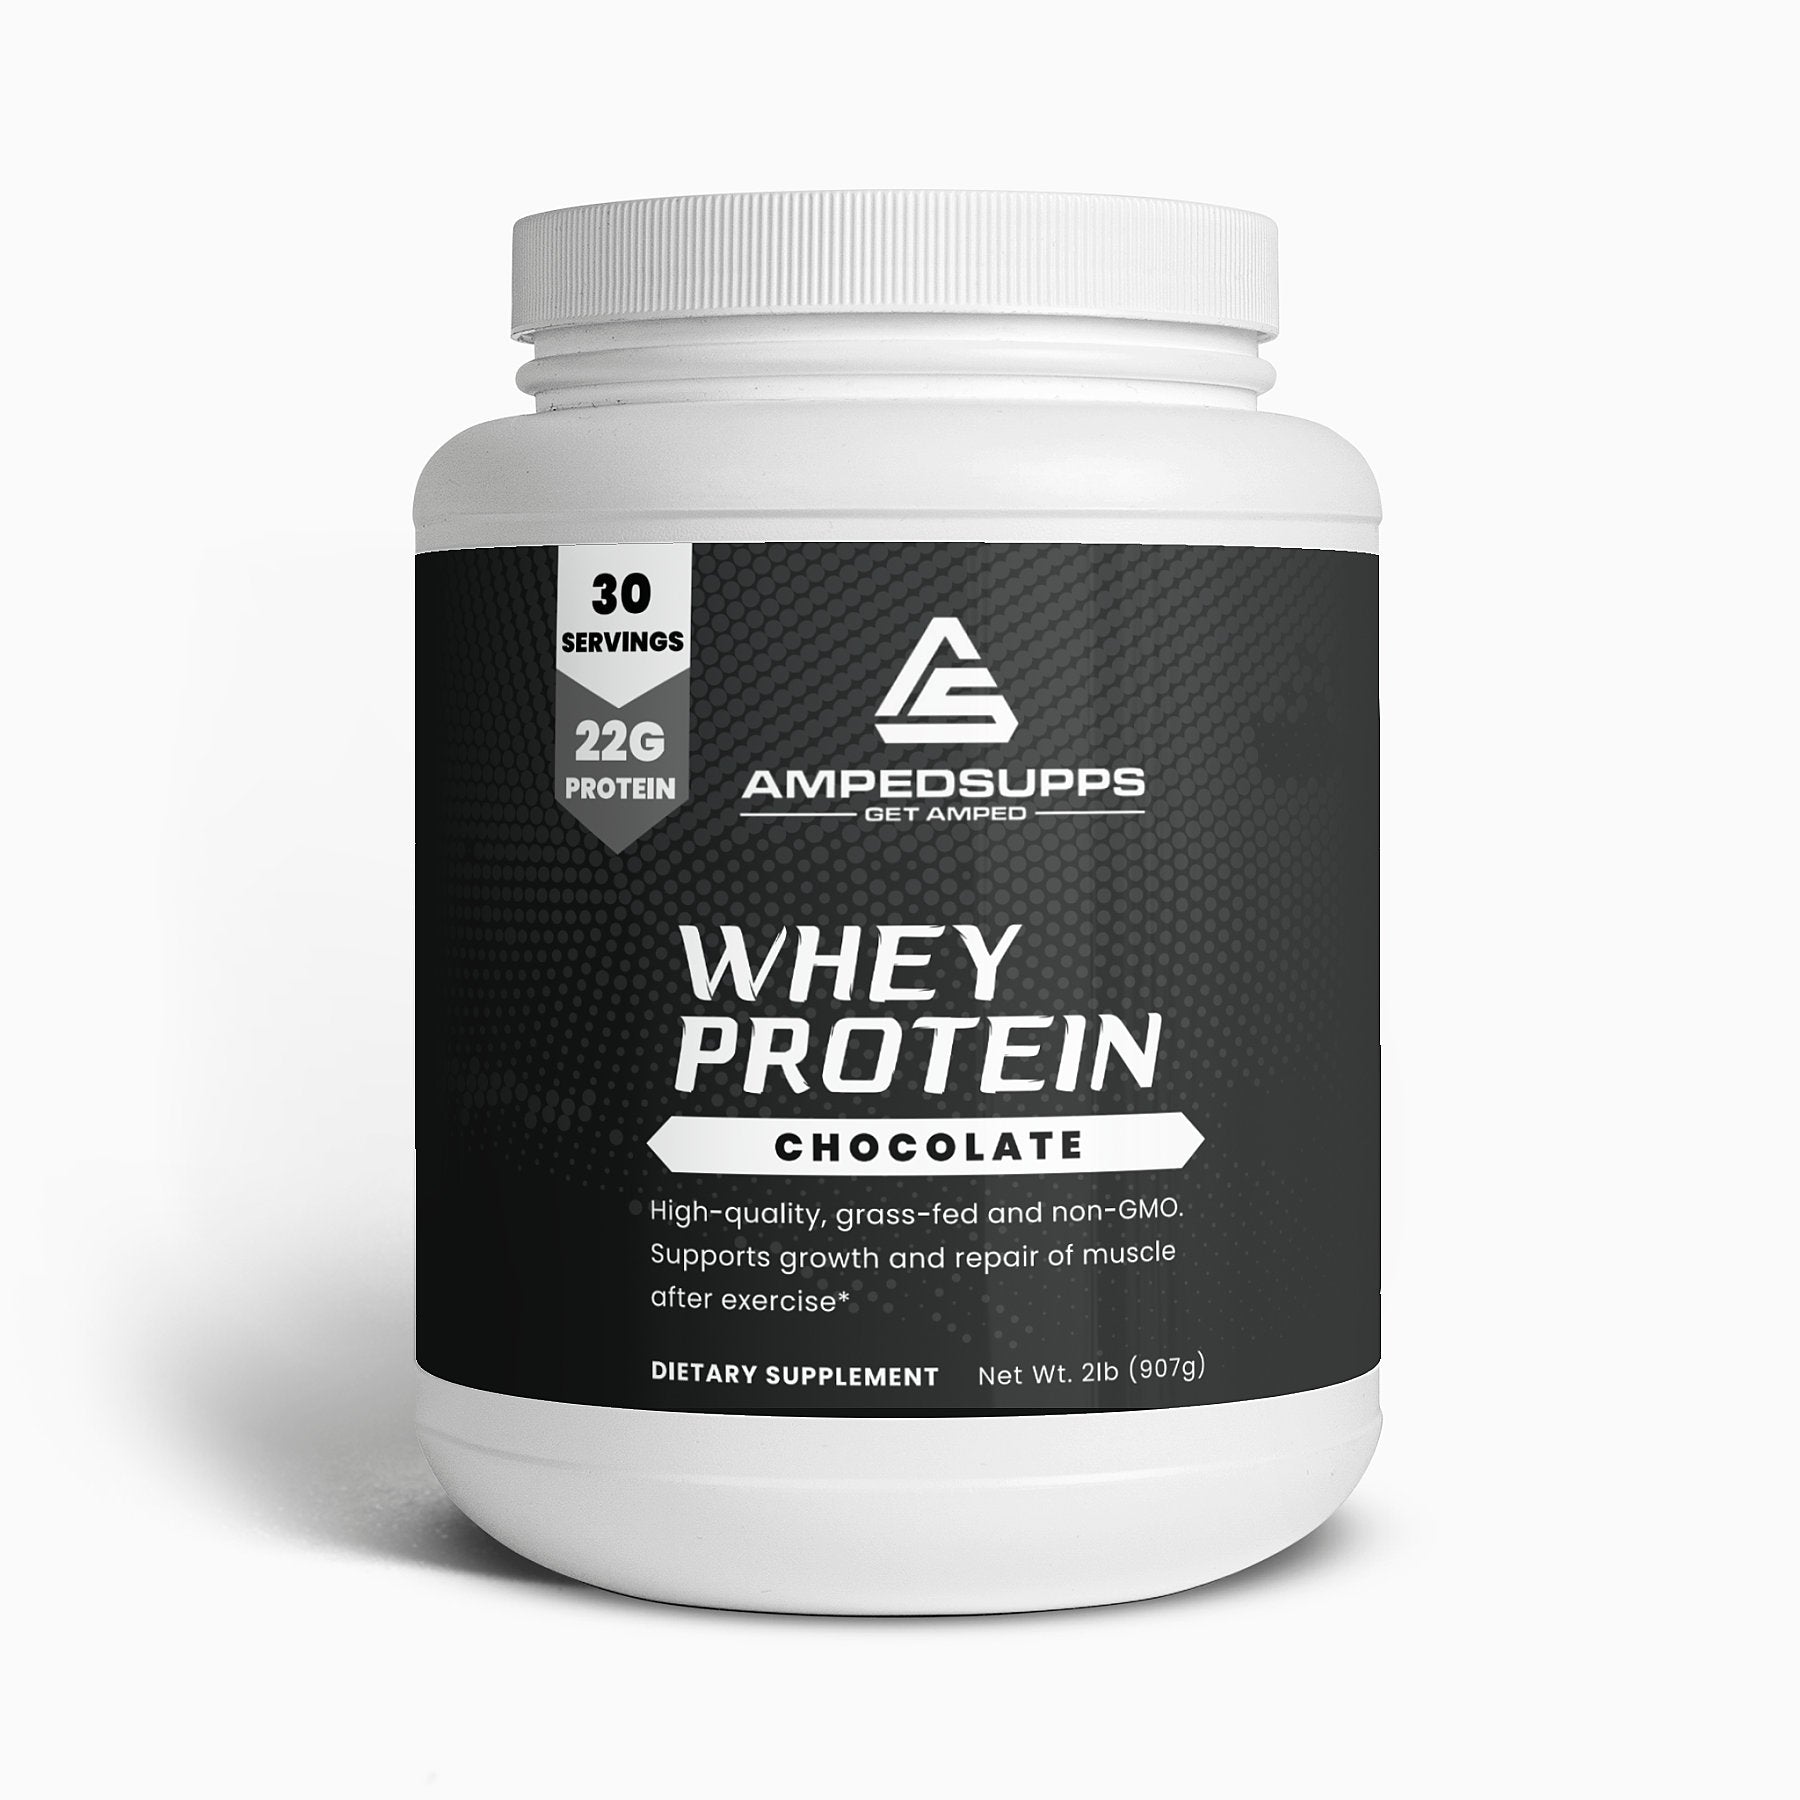 AMPEDSUPPS™ WHEY PROTEIN ISOLATE (Chocolate Flavour)